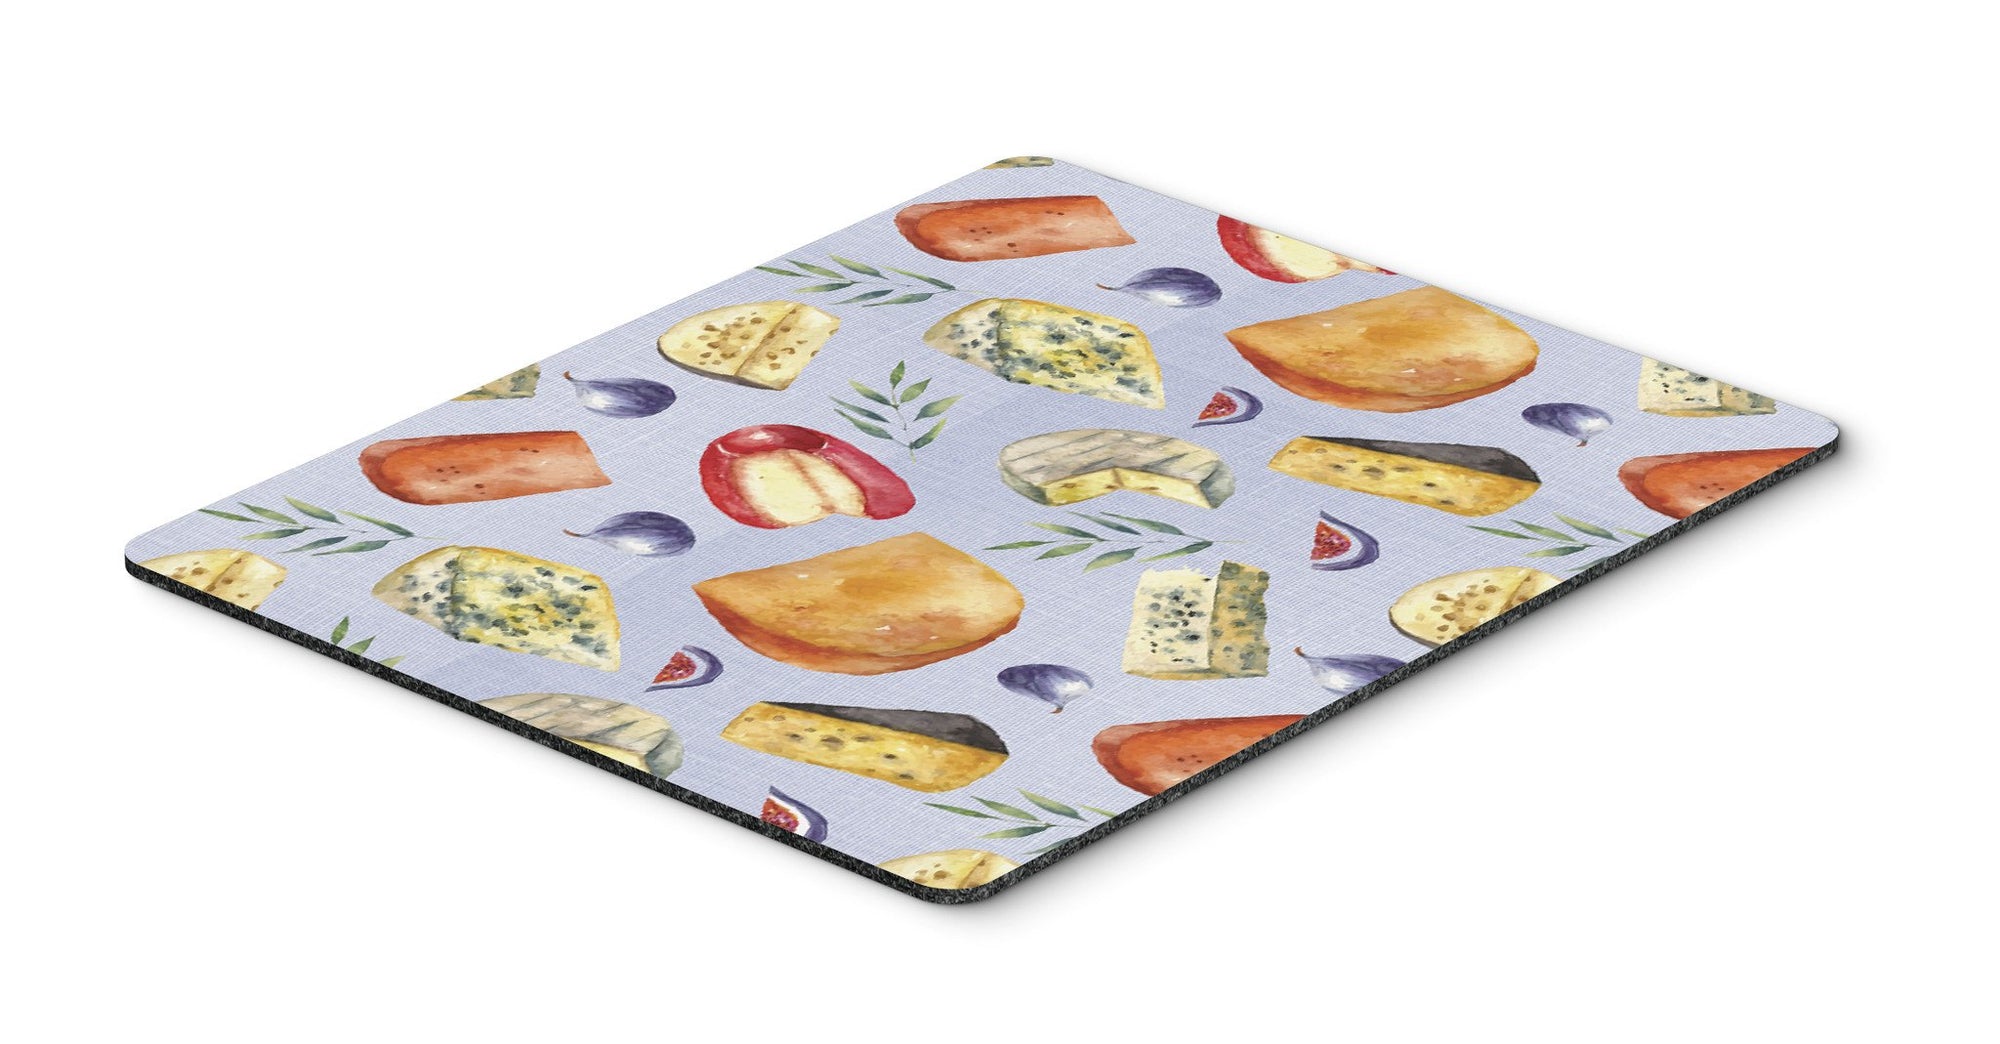 Assortment of Cheeses Mouse Pad, Hot Pad or Trivet BB5198MP by Caroline's Treasures